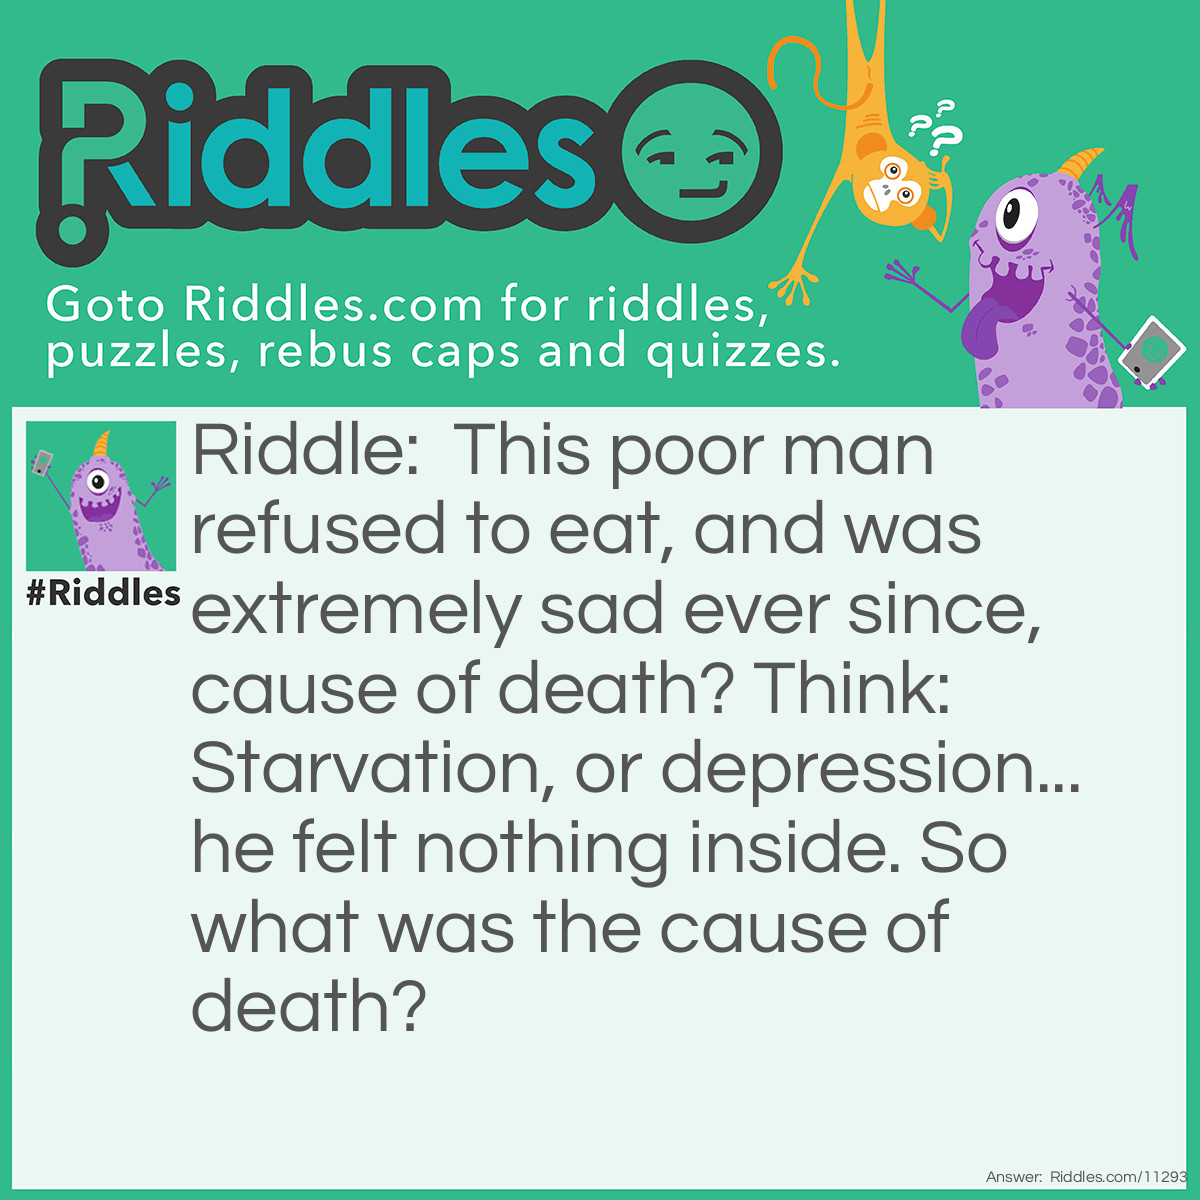 Riddle: This poor man refused to eat, and was extremely sad ever since, cause of death? Think: Starvation, or depression... he felt nothing inside. So what was the cause of death? Answer: Emptiness.